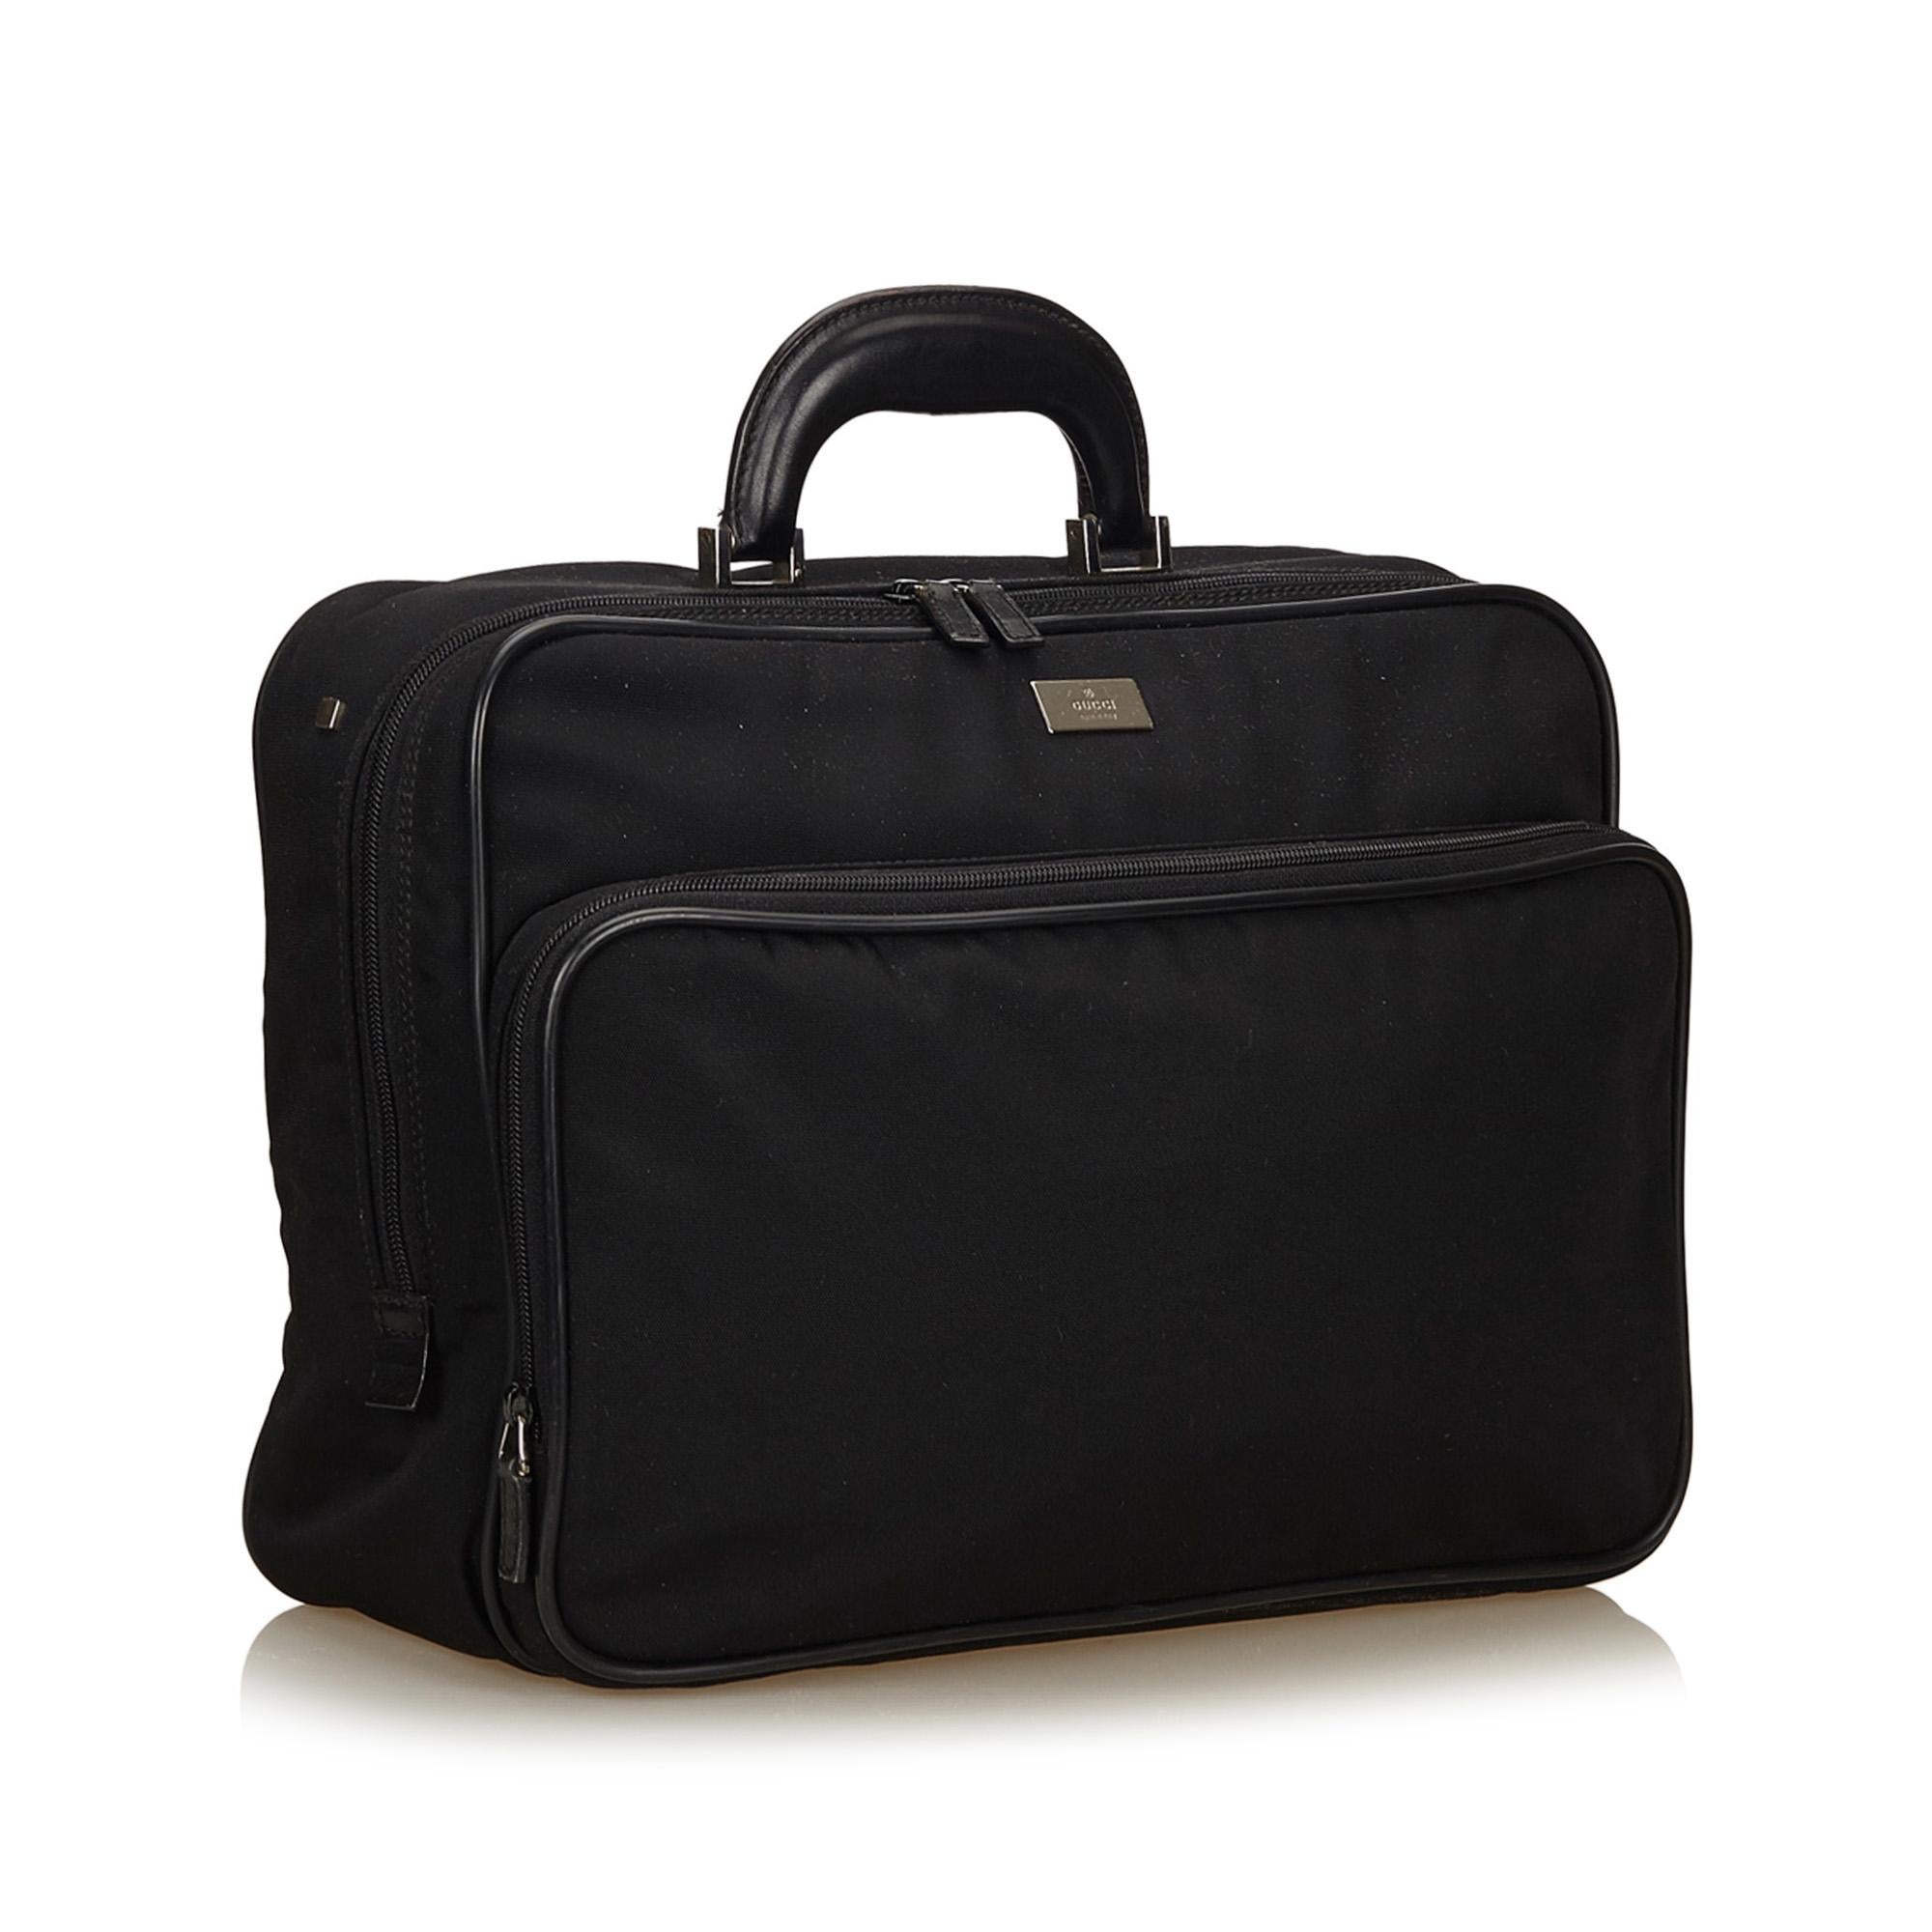 This briefcase features a nylon body, exterior front zip pocket, structured leather handle, zip around closure, and interior zip pocket. It carries as B+ condition rating.

Inclusions: 
Dust Bag

Dimensions:
Length: 40.00 cm
Width: 30.00 cm
Depth: